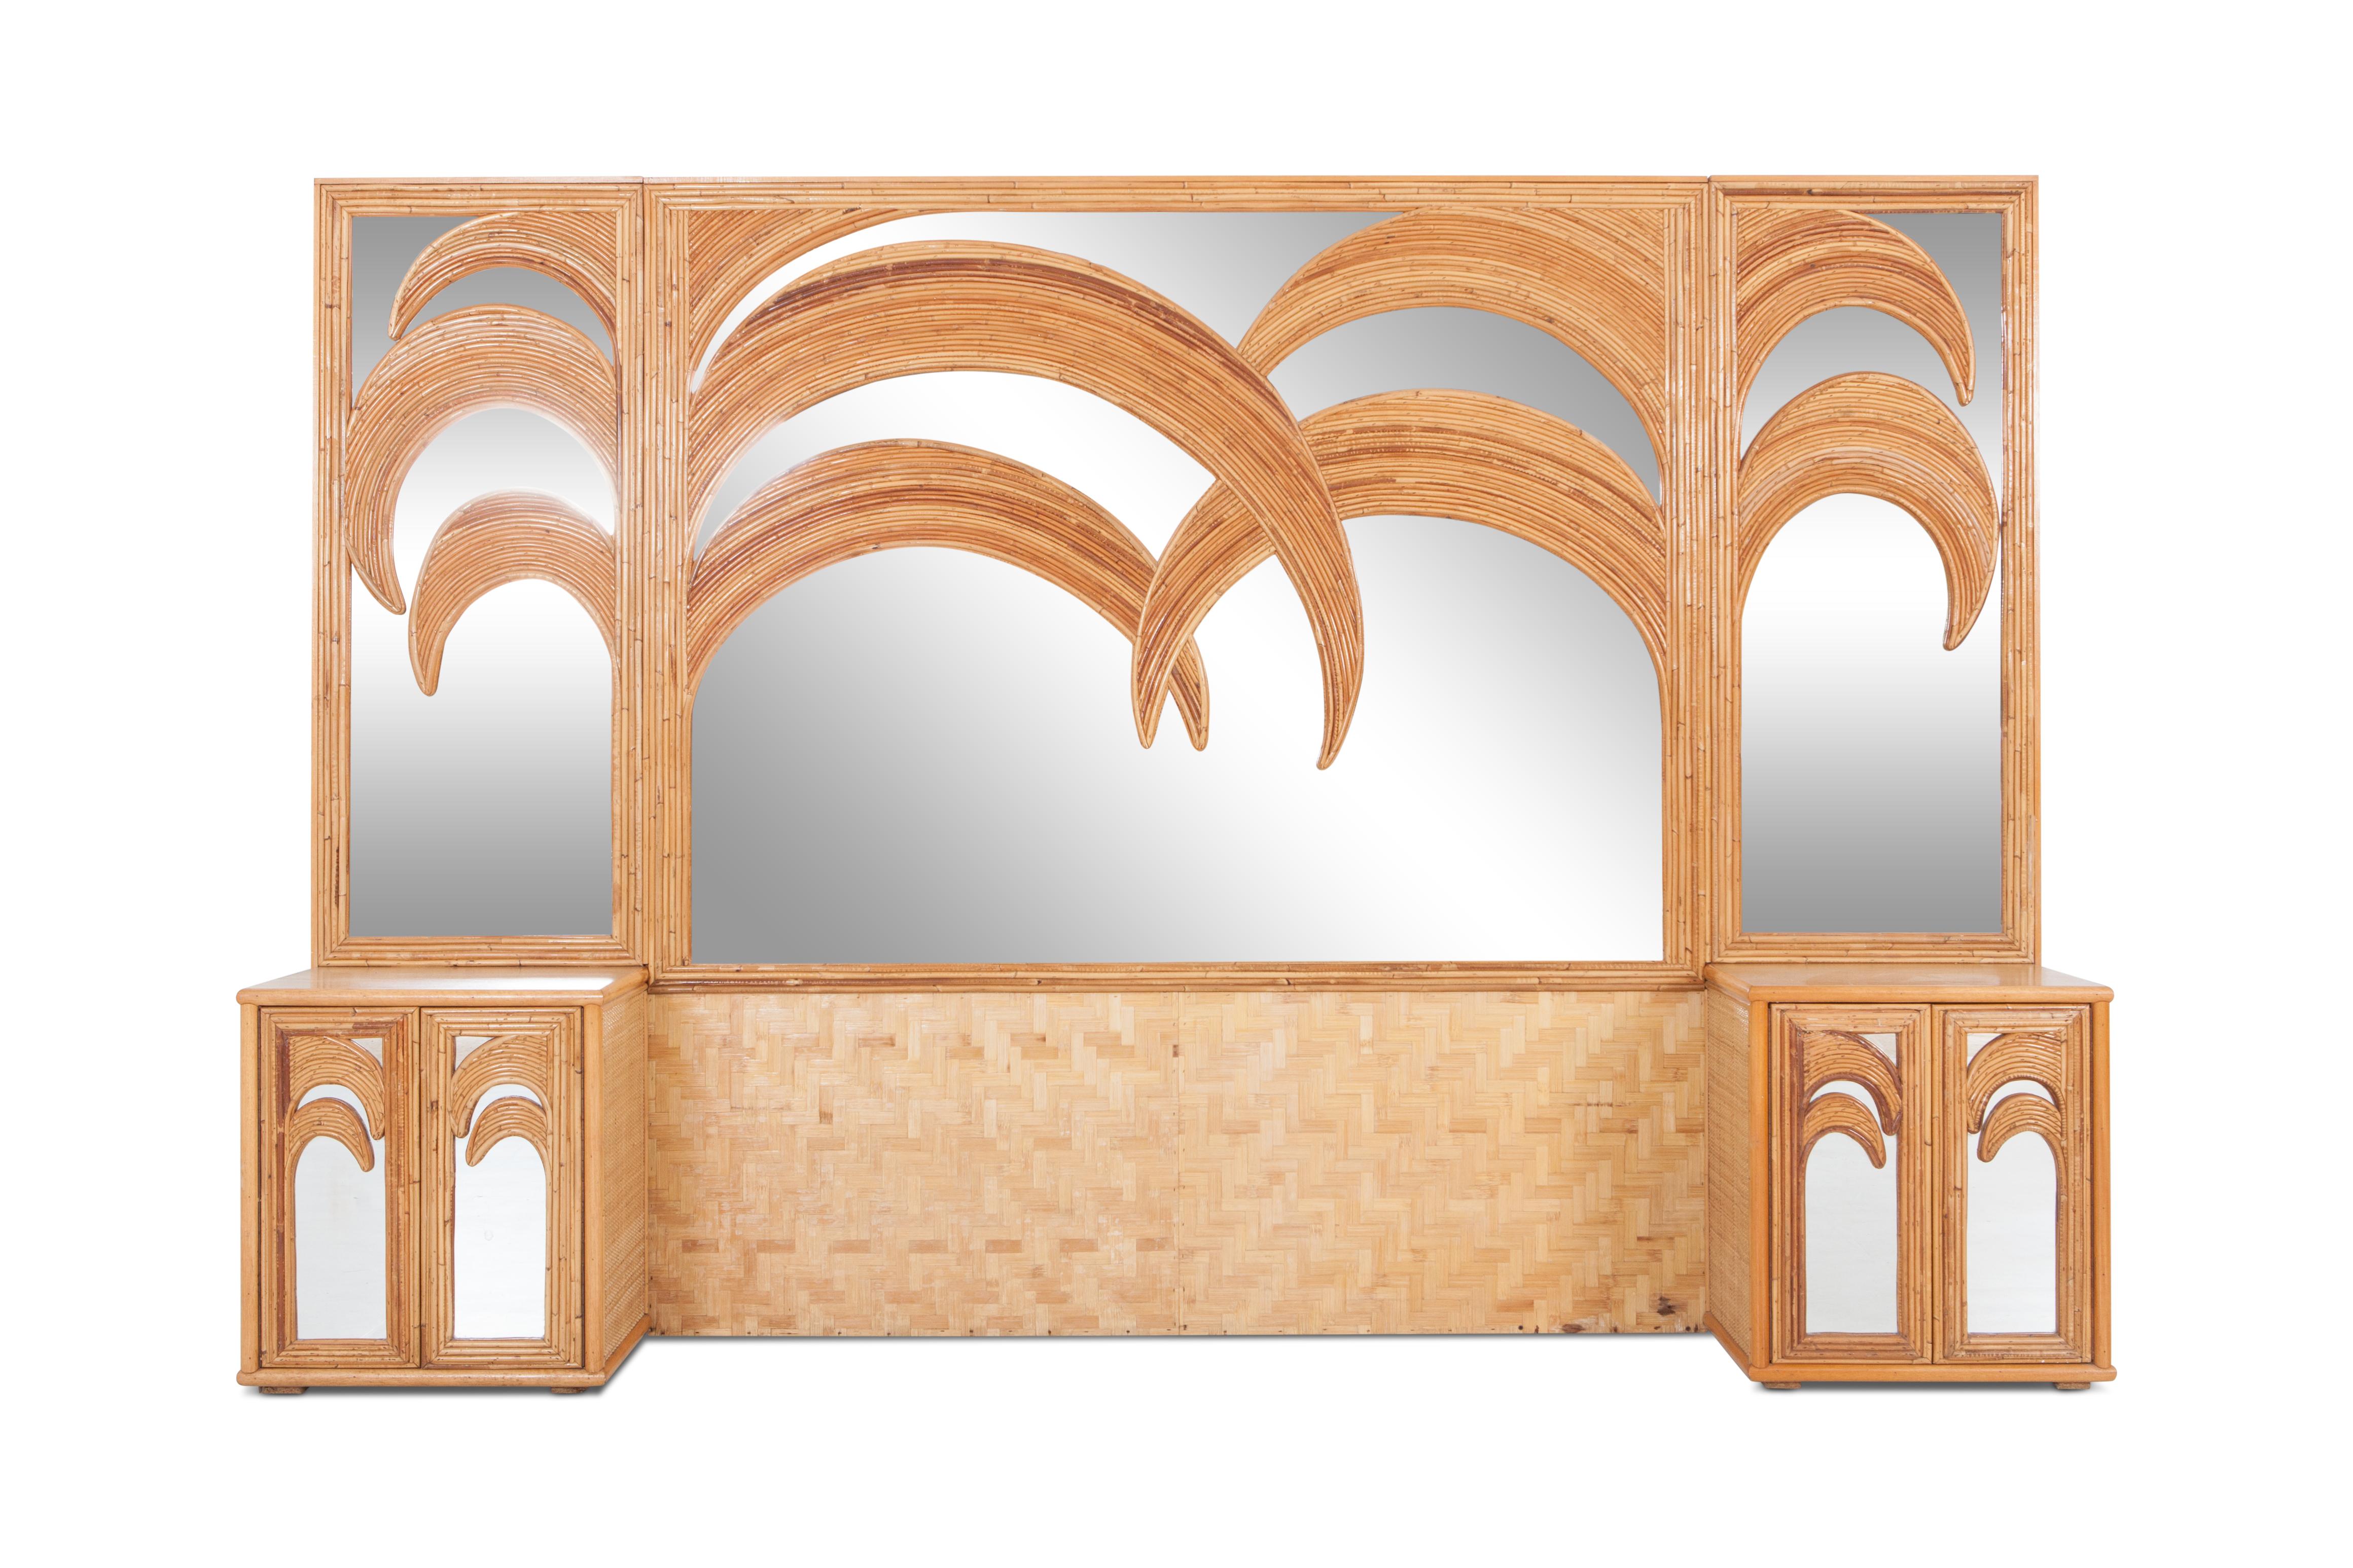 Italian tropical bedroom set consisting of two cabinets with mirror and one large center piece with mirror. Would fit well in a Gabriella Crespi inspired Hollywood Regency interior. It’s scenery of palm trees in rattan and bamboo just breathe that